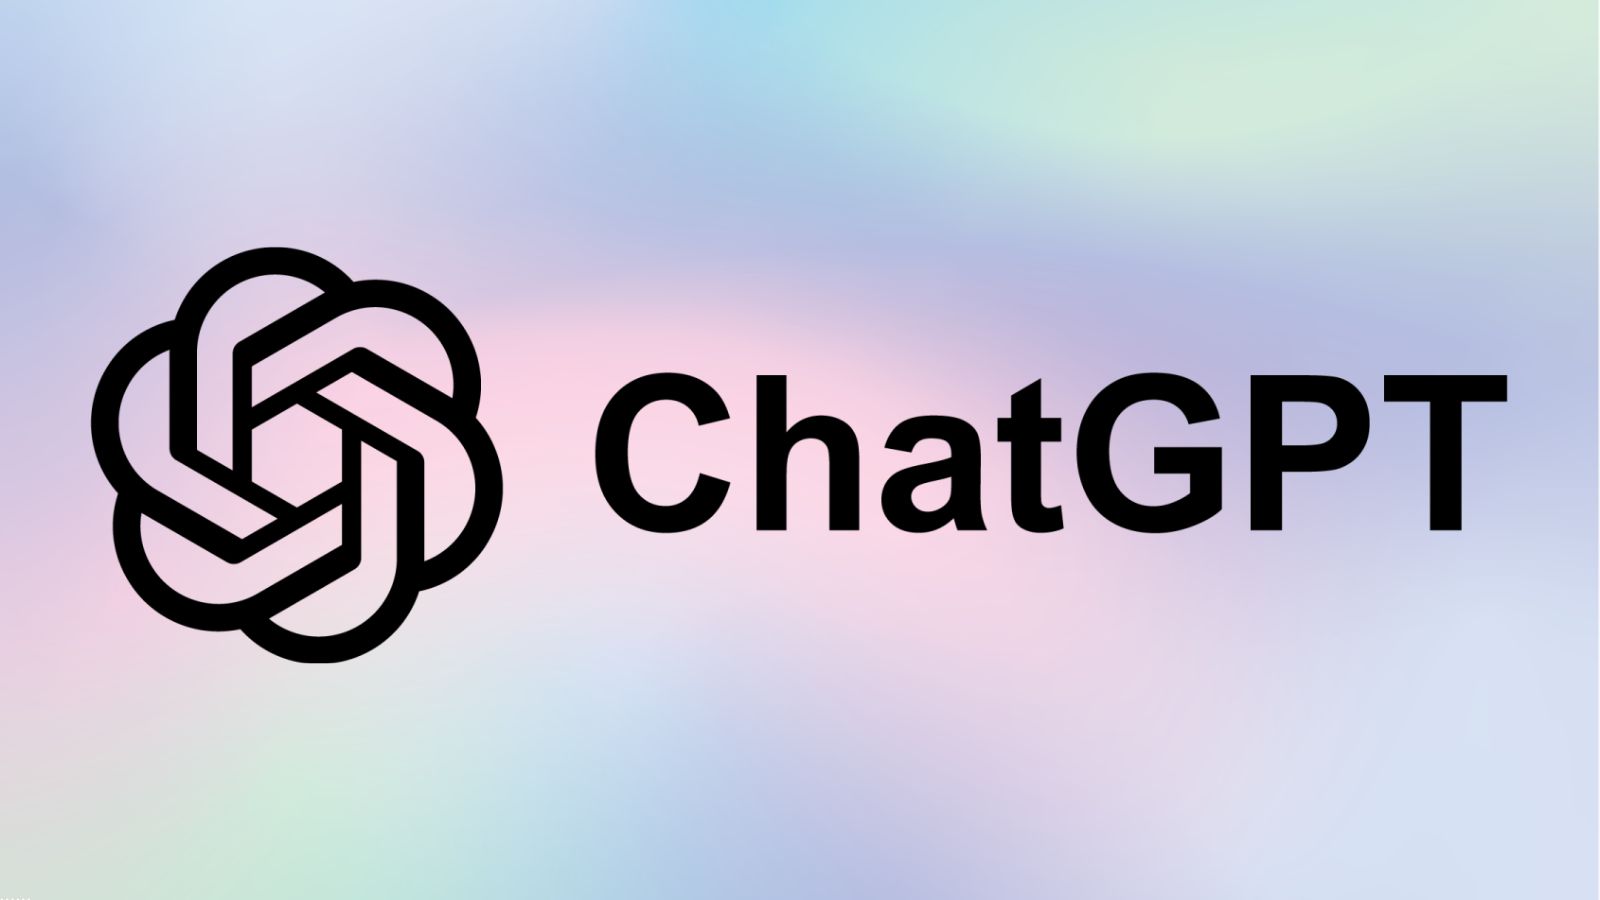 ChatGPT users can now edit images generated by DALL-E 3